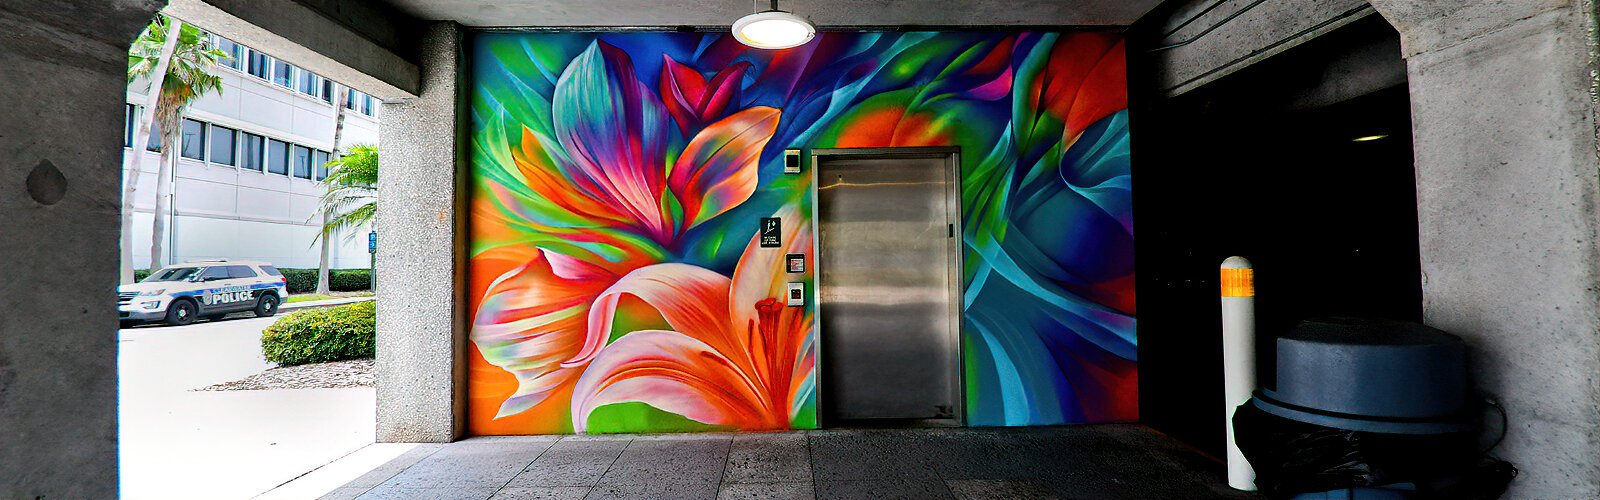 Muralist Dreamweaver brings life to the grey Municipal Parking Garage with her “Wild Flora” mural created for Clearwater's Art Oasis Mural Festival.